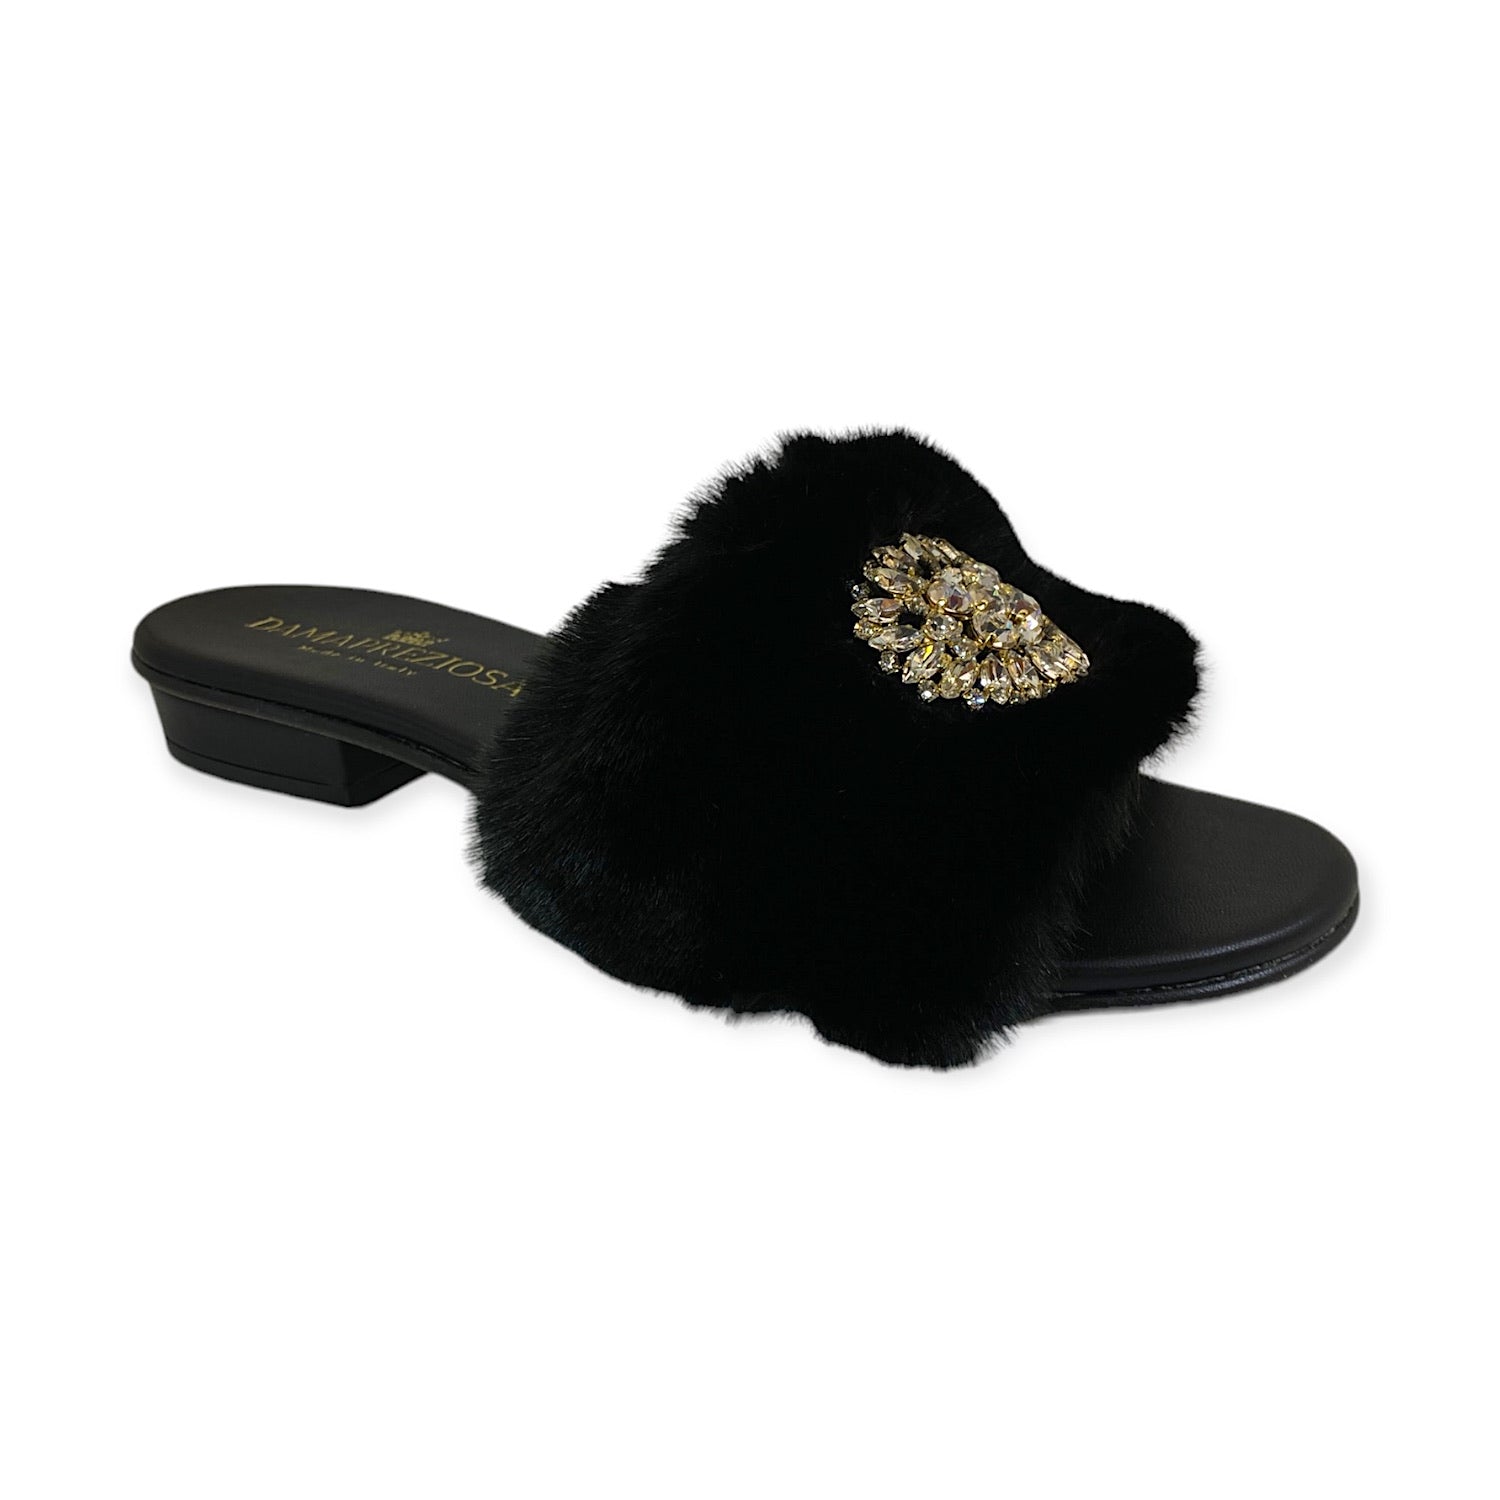 Victoria flat mule in black faux fur with crystals